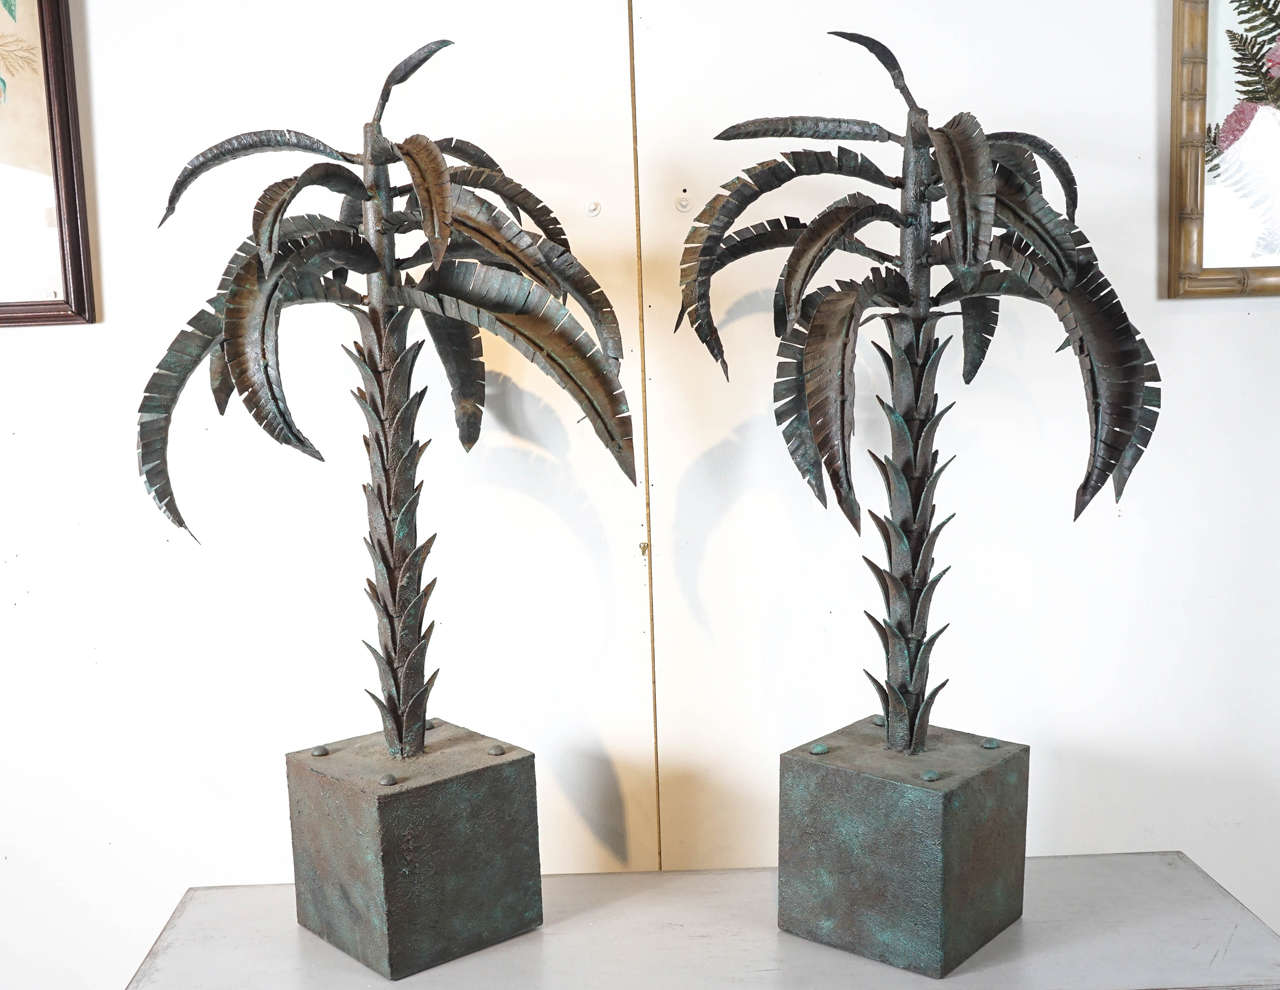 Here is a terrific pair of ornamental palm tree sculptures on pedestals.
In the style of Tony Duquette, the sculptures are made of steel and finished in a textural oxidized copper patina. The palm leaves are form fitted and can be moved around.